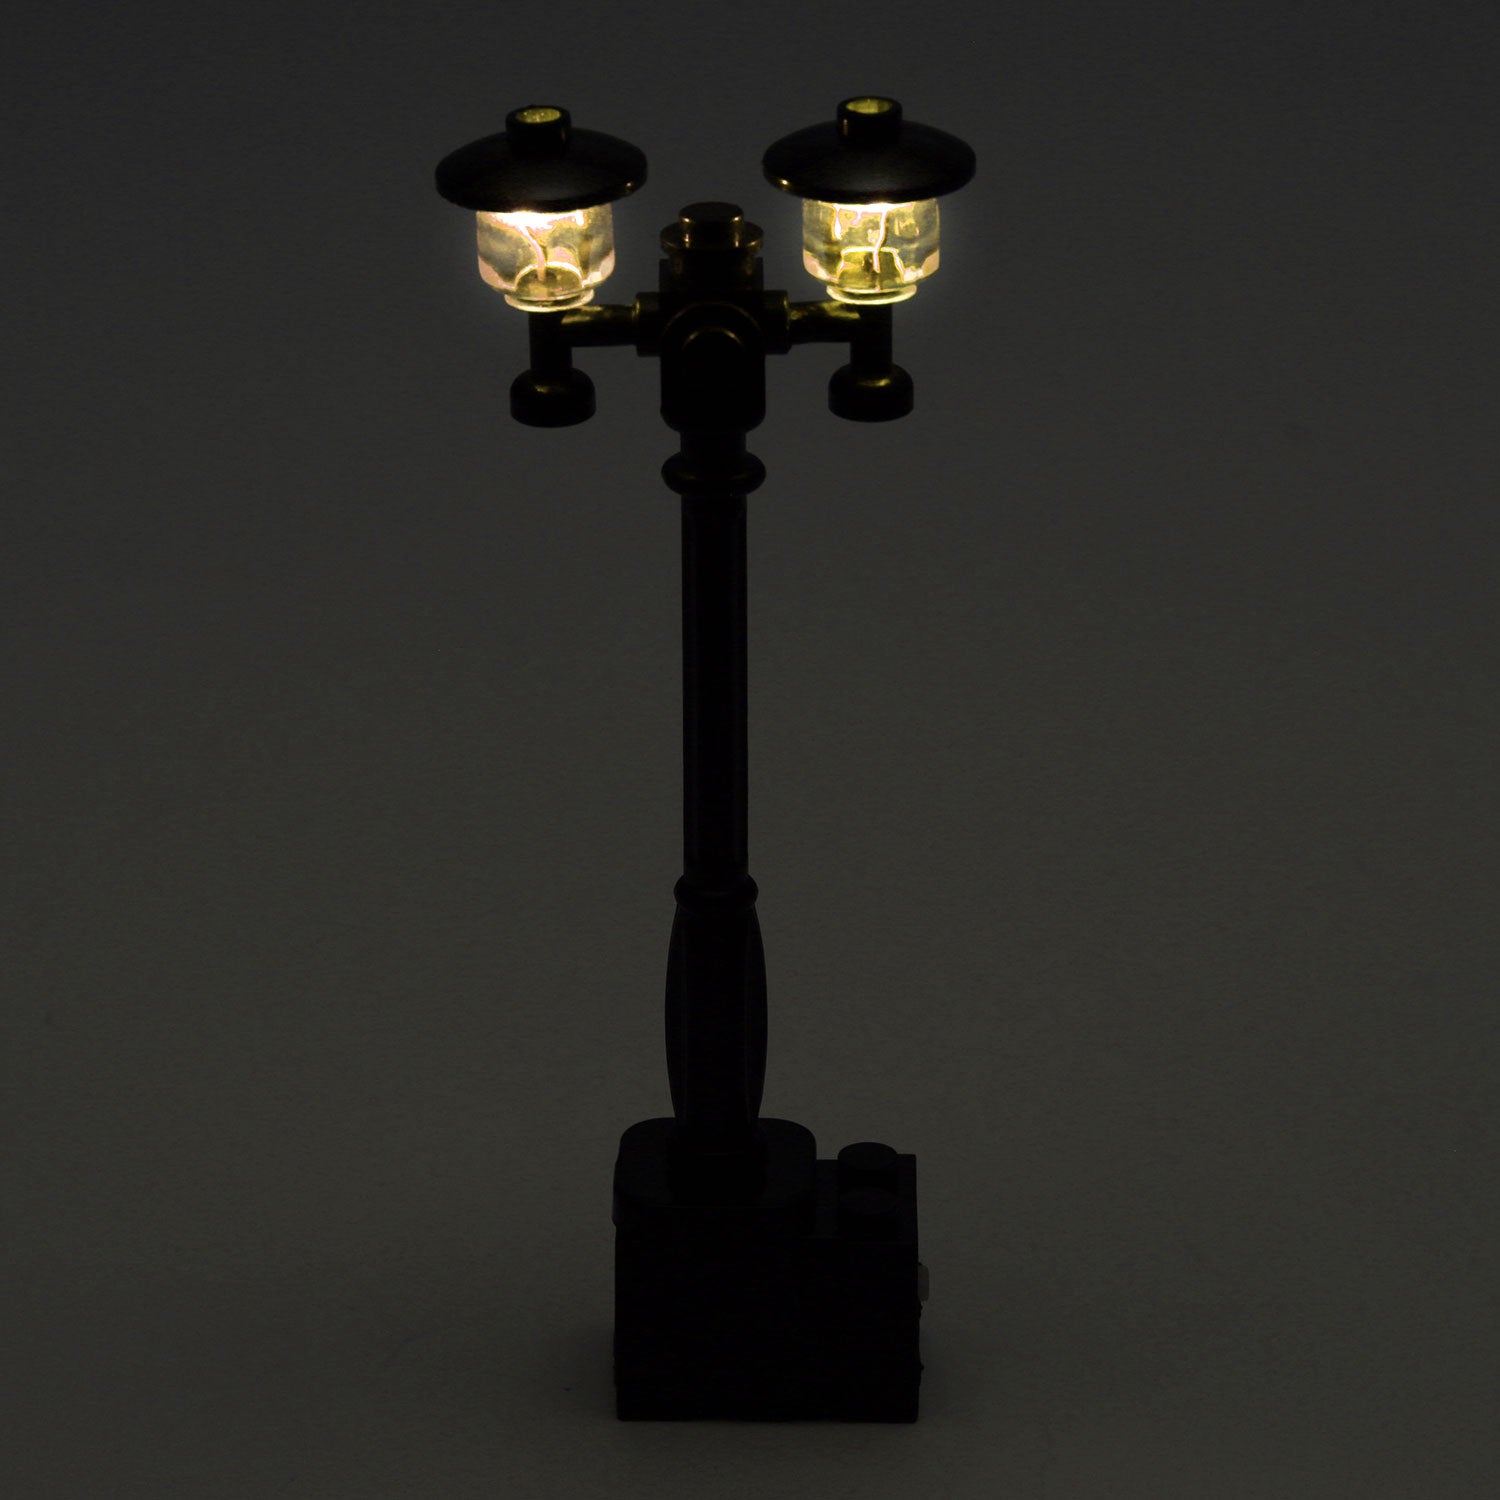 Black Double Light-Up Minifig Scale Lamp Post (Warm/Yellow Light) - LEGO Compatible